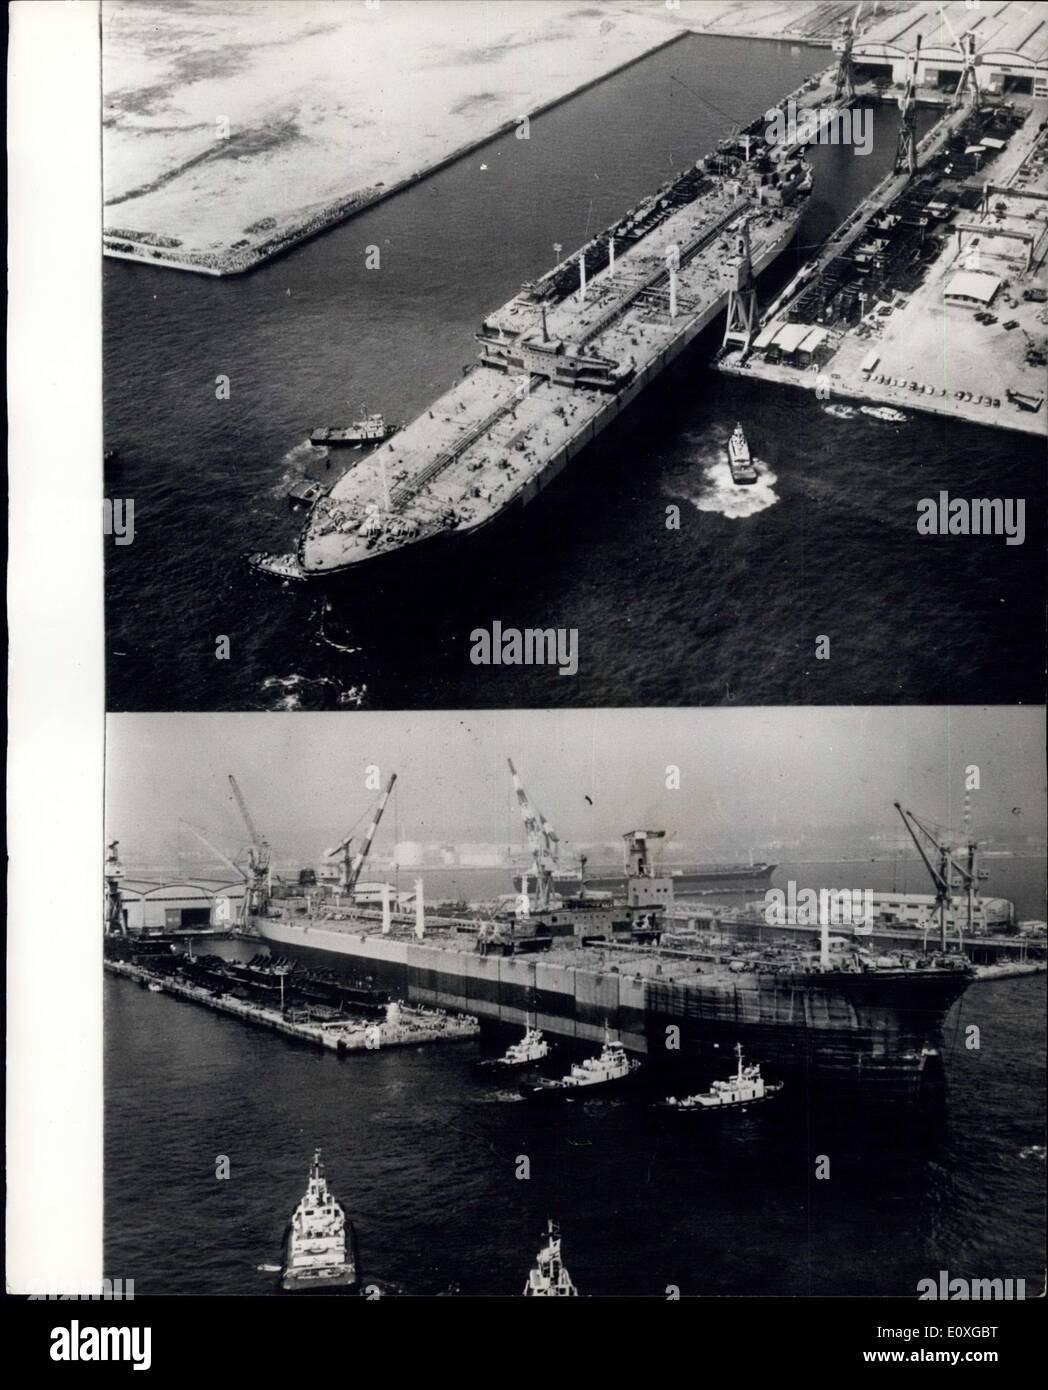 Sep. 12, 1966 - World's Largest Ship Launched: The world's biggest ship, the 209,000-ton supertanker, Udemitsu Maru, measuring 342 meters long, 53 meters wide, and 49 metres from his bottom to the most tip, was launched last week at the Yakahama Shipyard, Japan of Ishikawajima-Harima Heavy Industries Cs. Built for Idamitau Kassn, a leading Japanese oil refining and importing firm. the mammoth tanker will bring oil from the Persian Gulf in Japan Owing to high winds the launching was postponed 24 hours Stock Photo